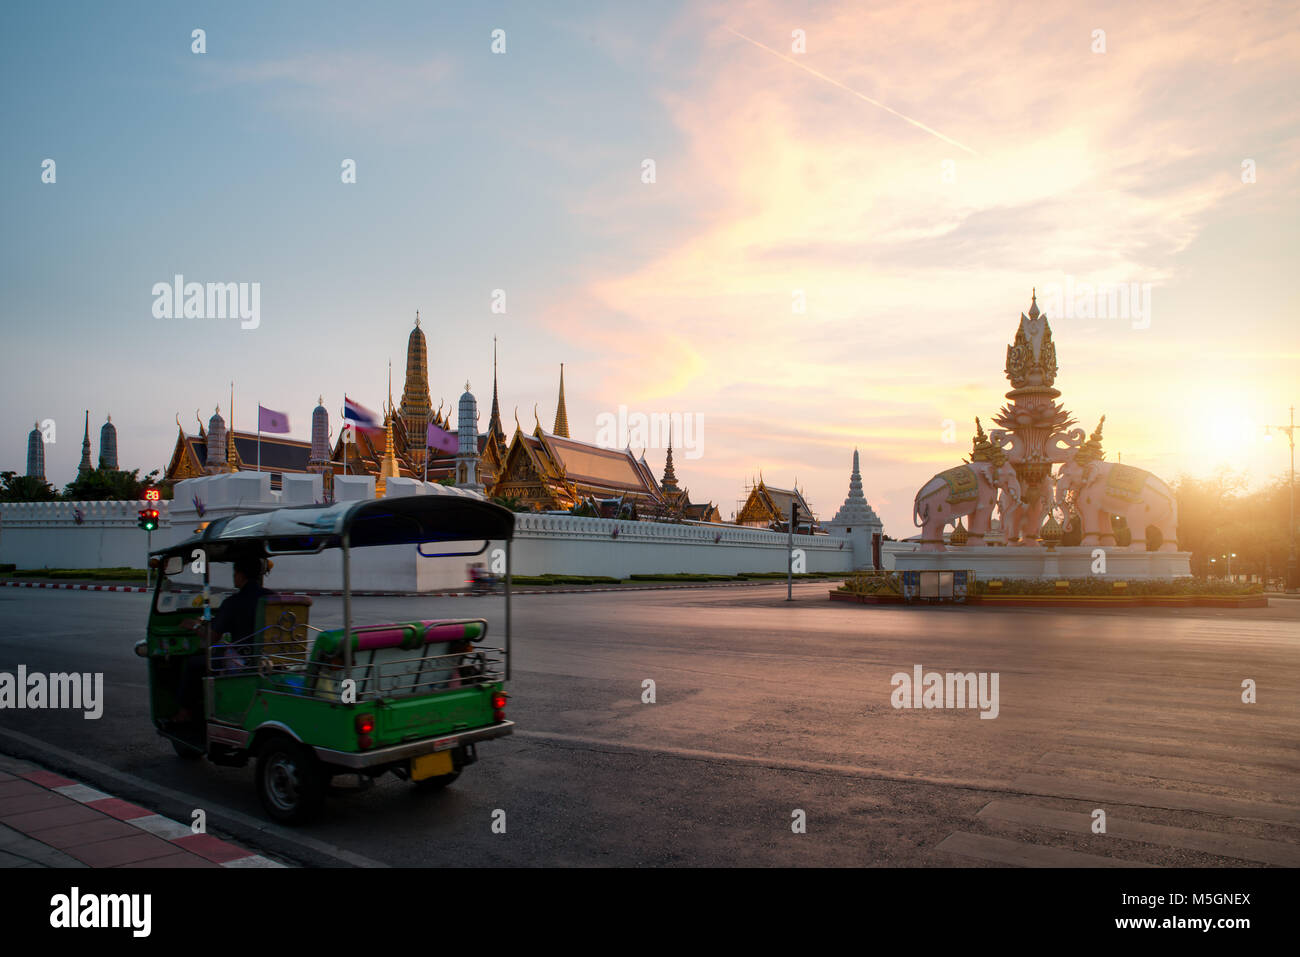 Tuk-tuk for passenger cars To go sightseeing around the Grand Palace in Bangkok with sunset sky background Stock Photo